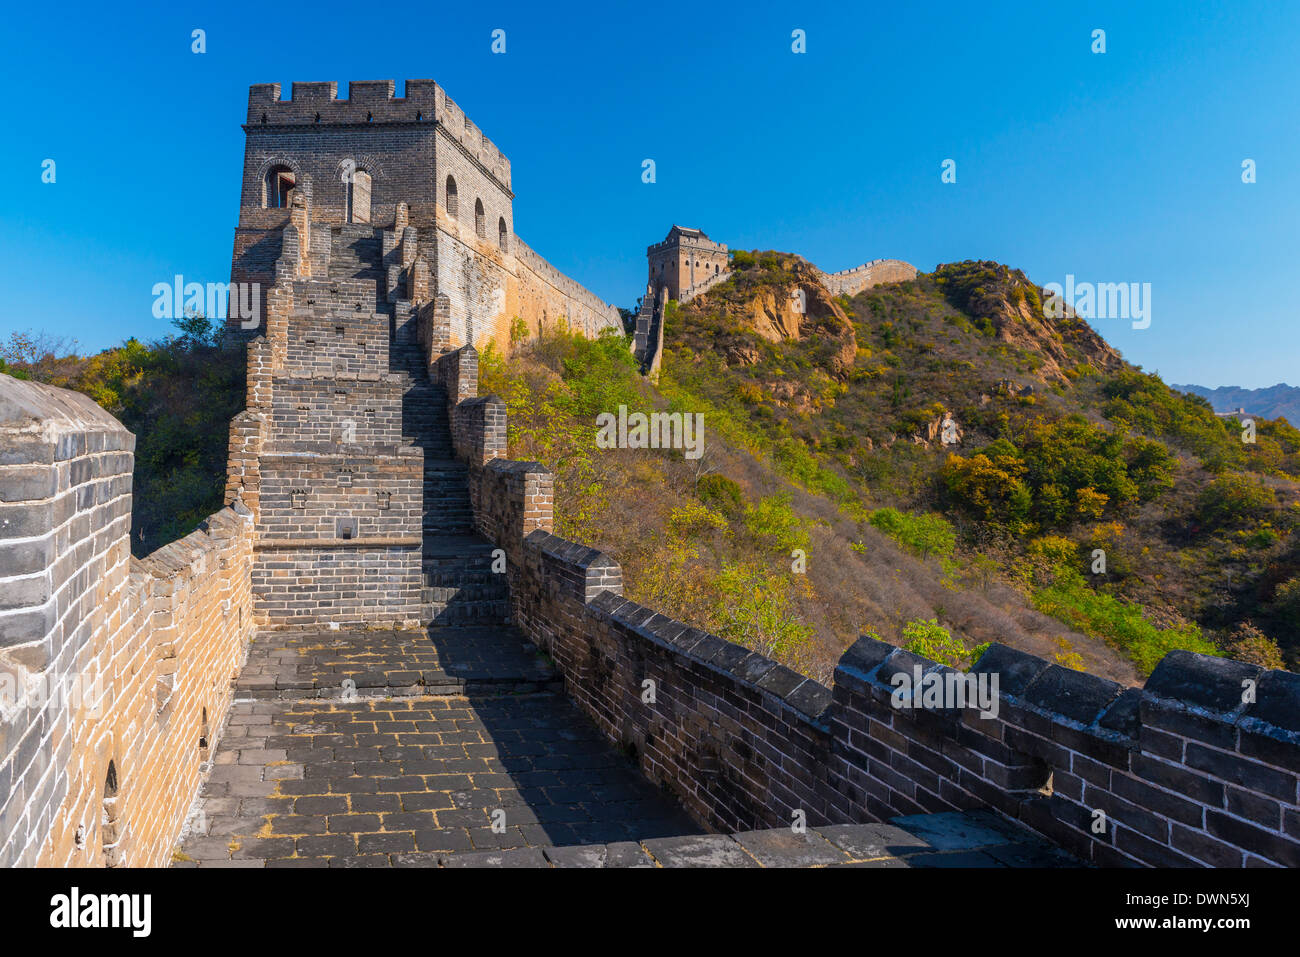 Great Wall of China, UNESCO Site, dating from the Ming Dynasty, Jinshanling, Luanping County, Hebei Province, China Stock Photo